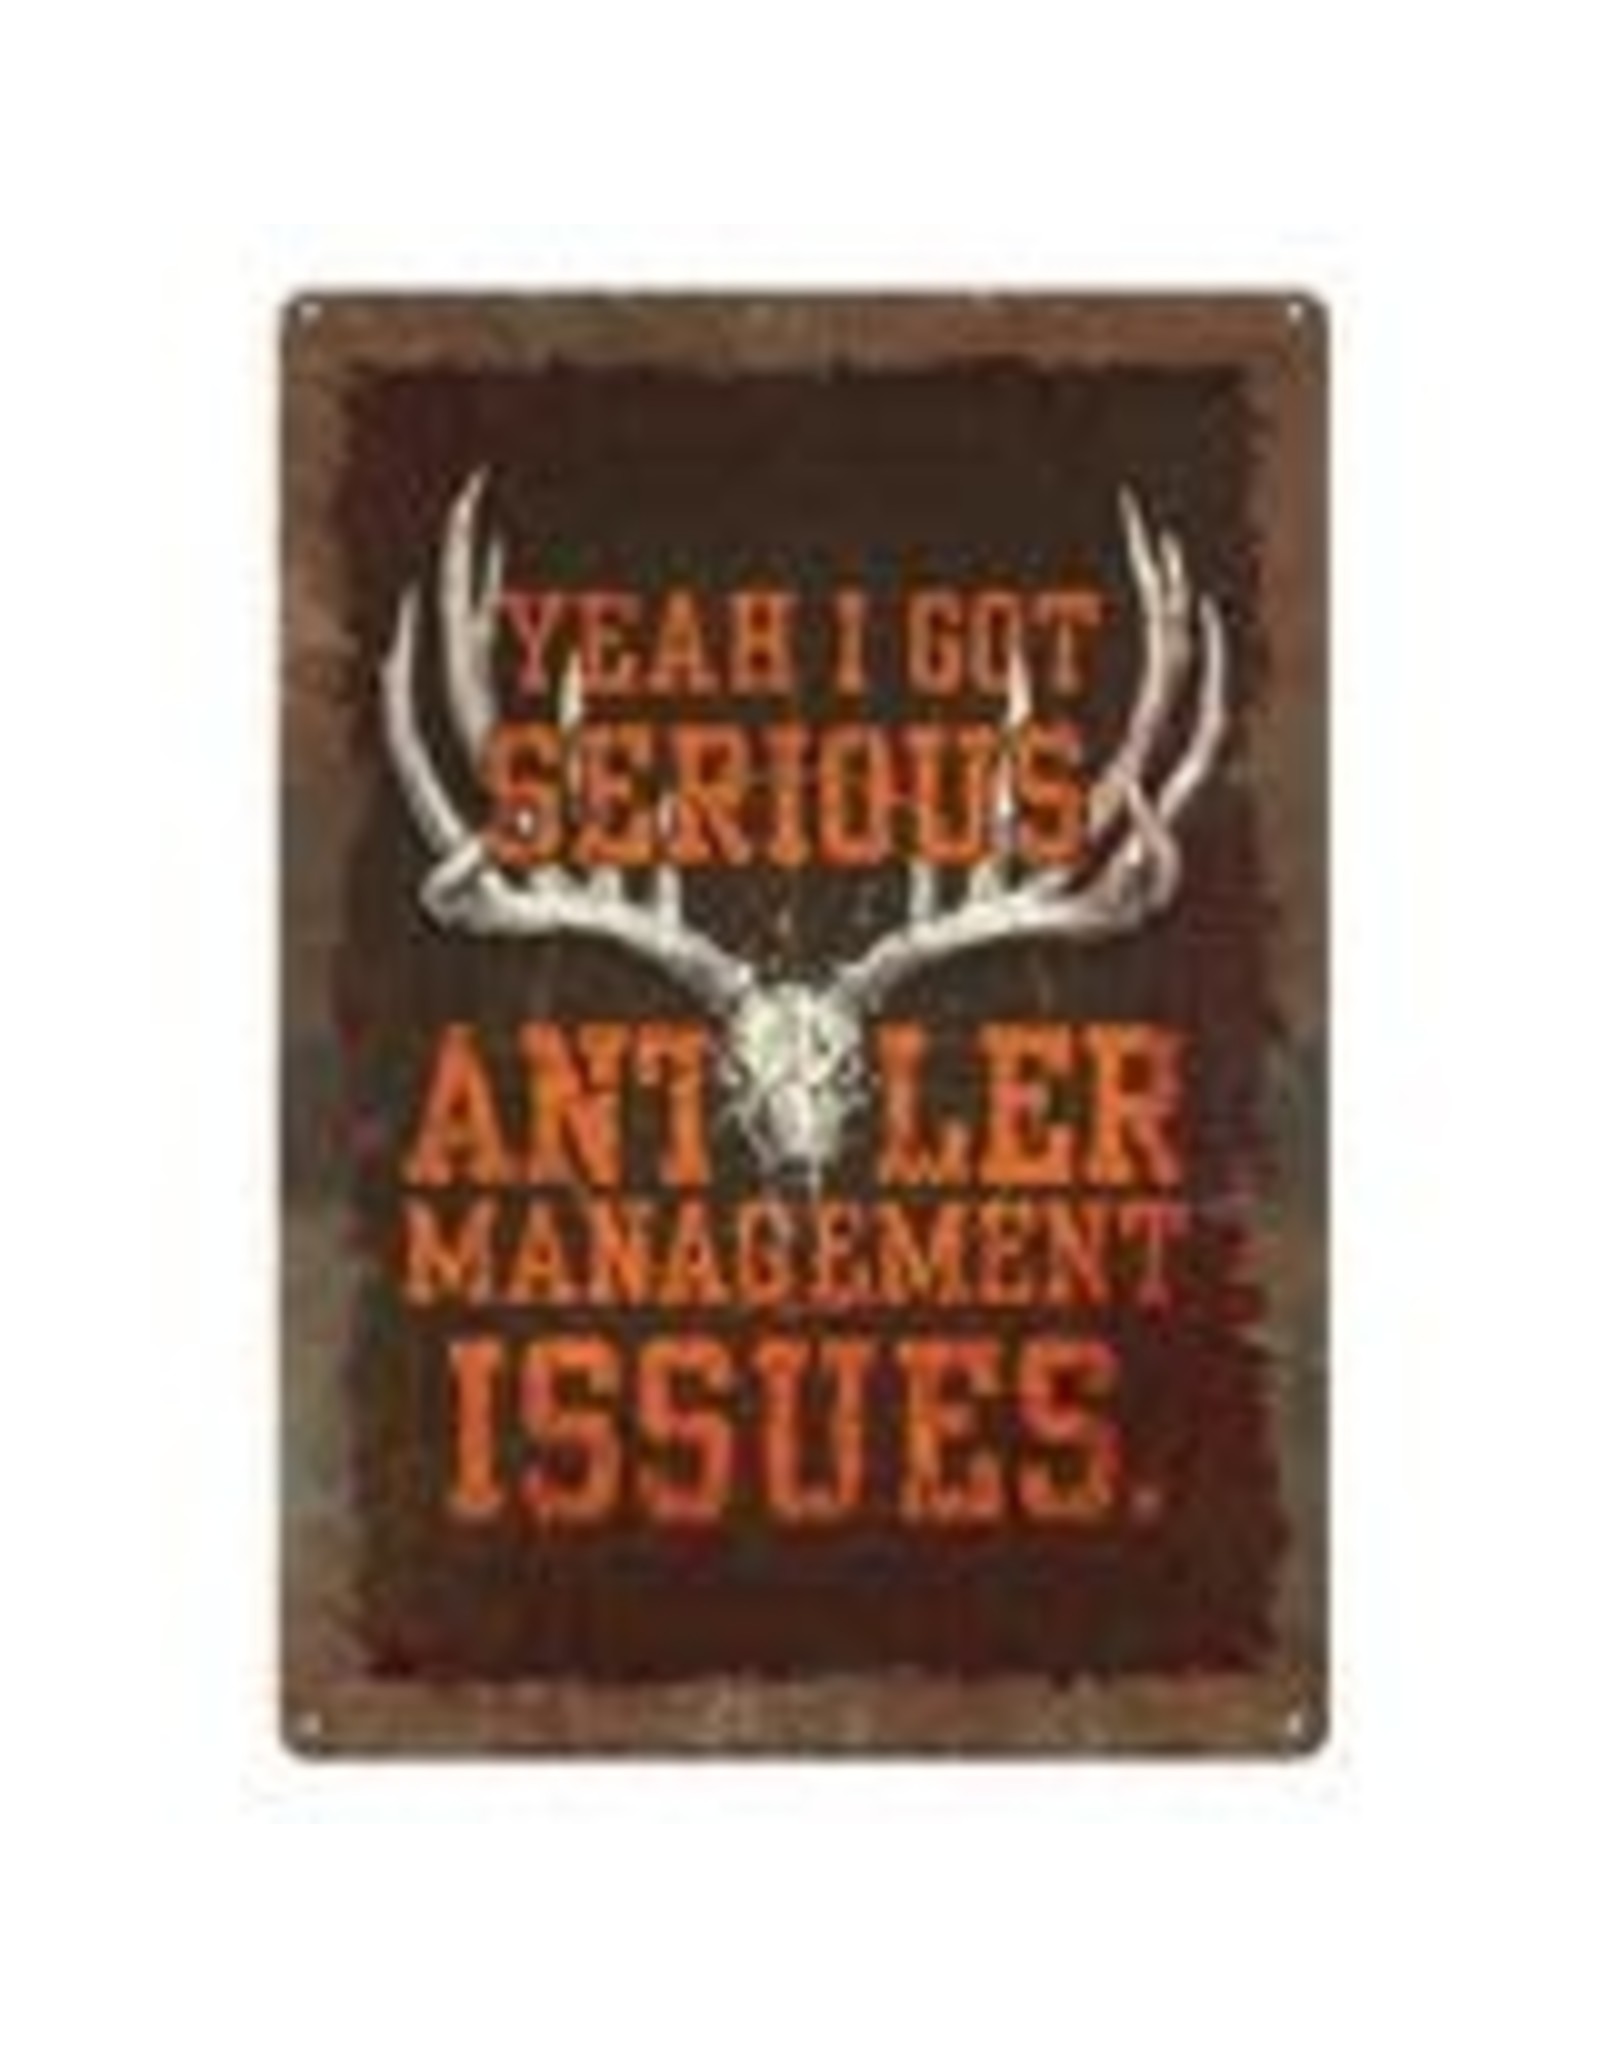 Rivers Edge Products Tin Sign 12in x 17in - Antler Management